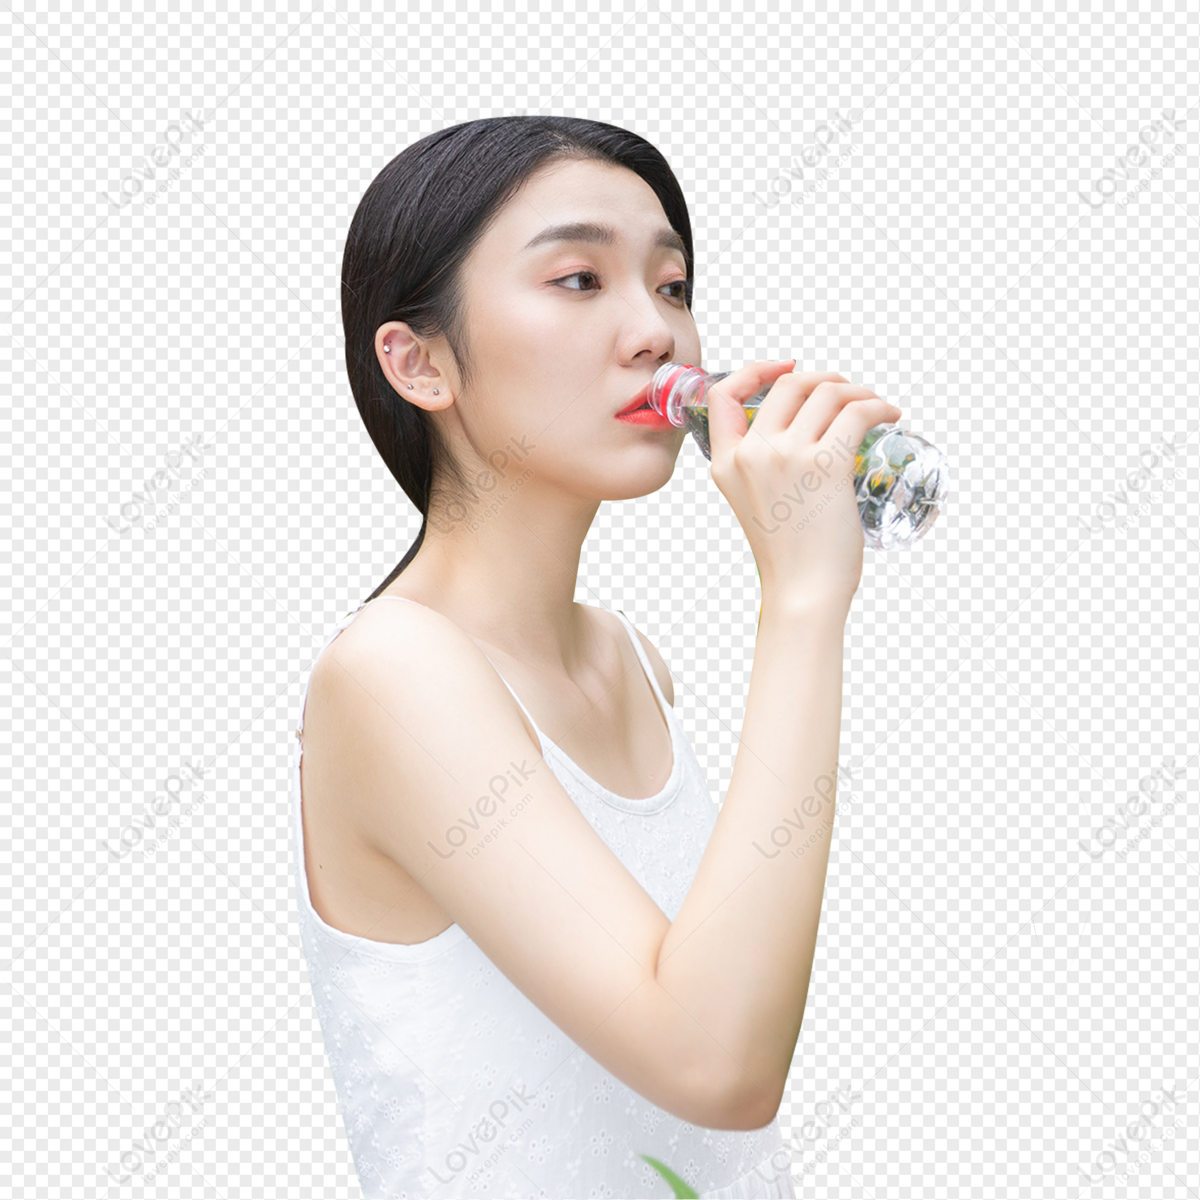 Teenage Girl Drinking Water Png Image And Clipart Image For Free Download Lovepik 401623278